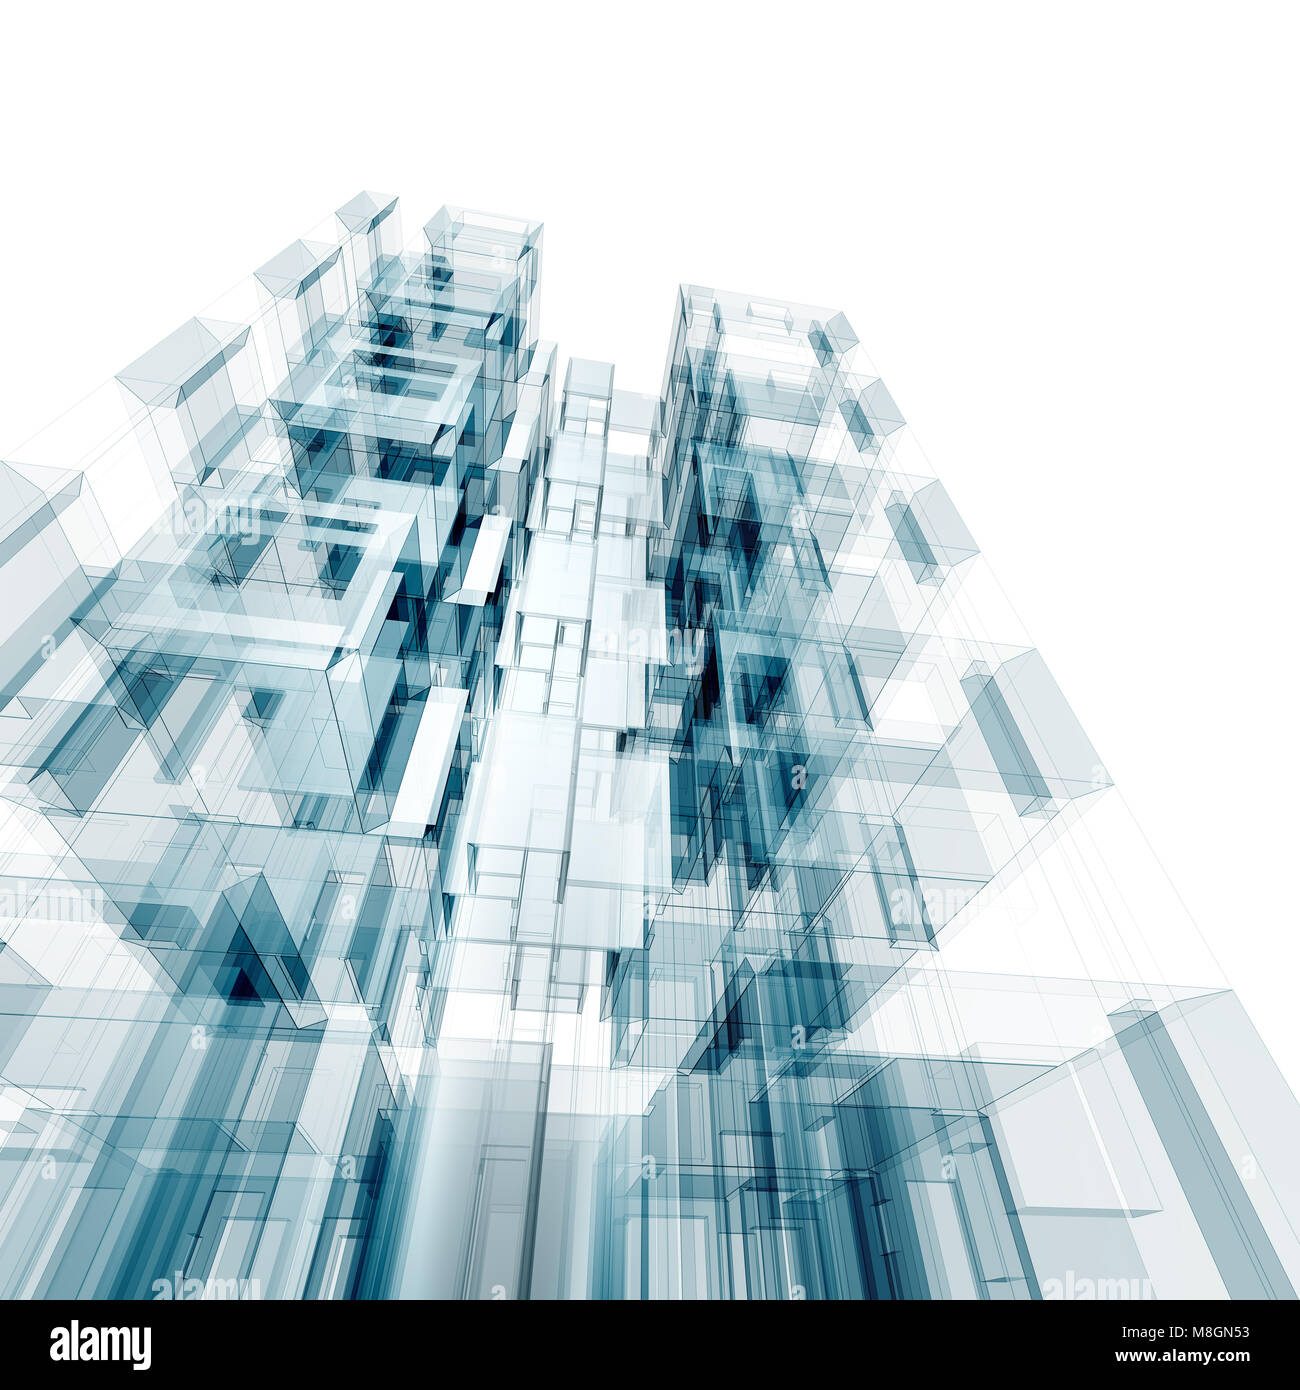 Architecture concept 3d rendering Stock Photo